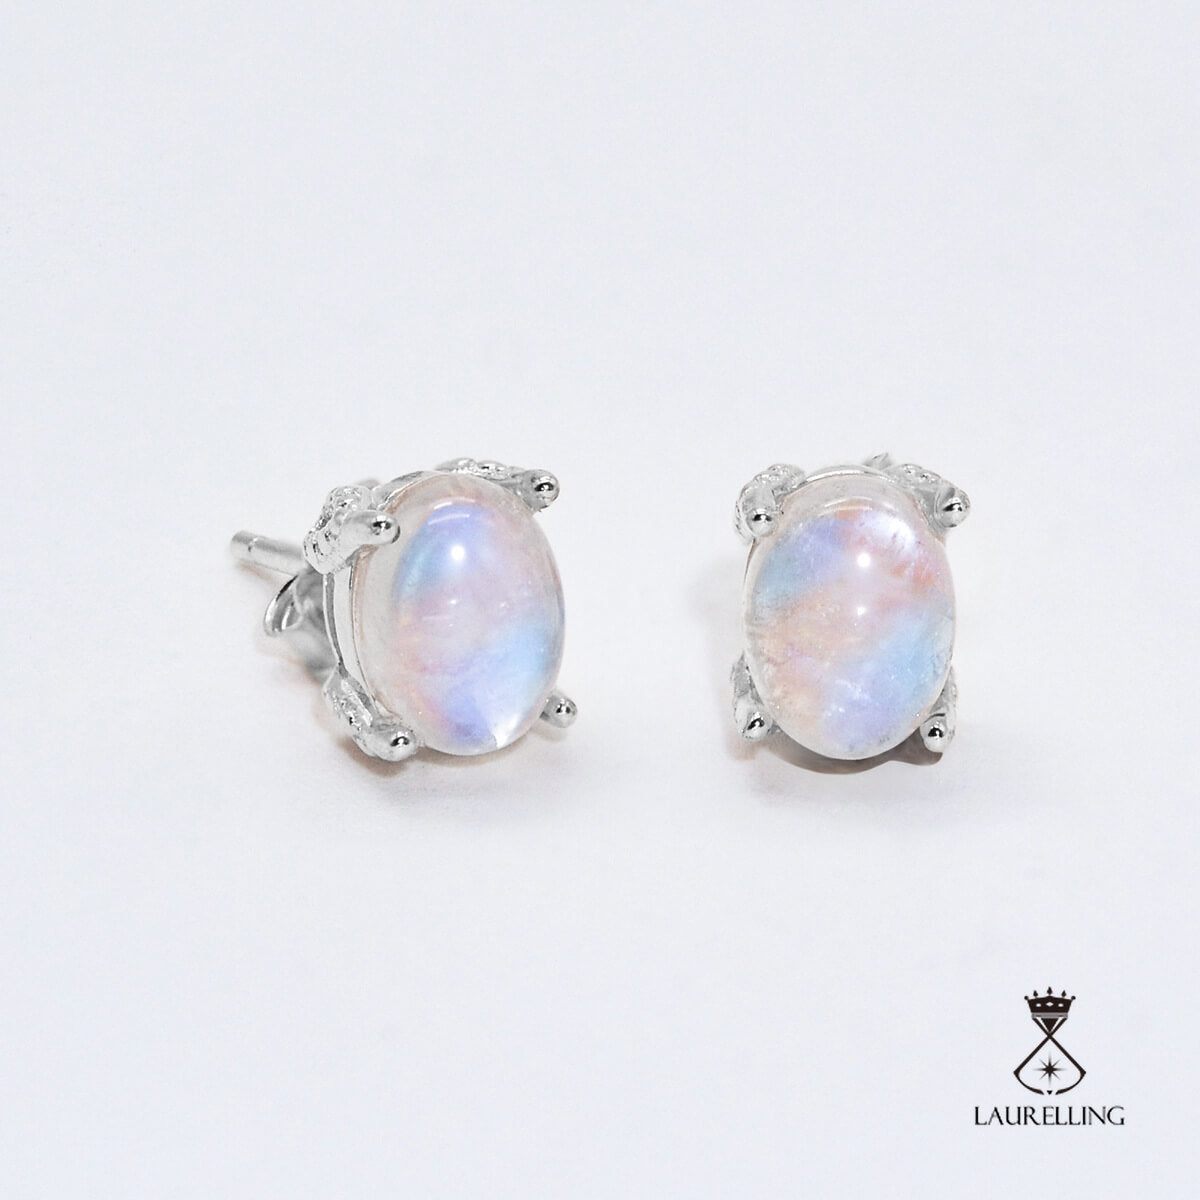 S925 Sterling Silver with Moonstone Stud Earrings